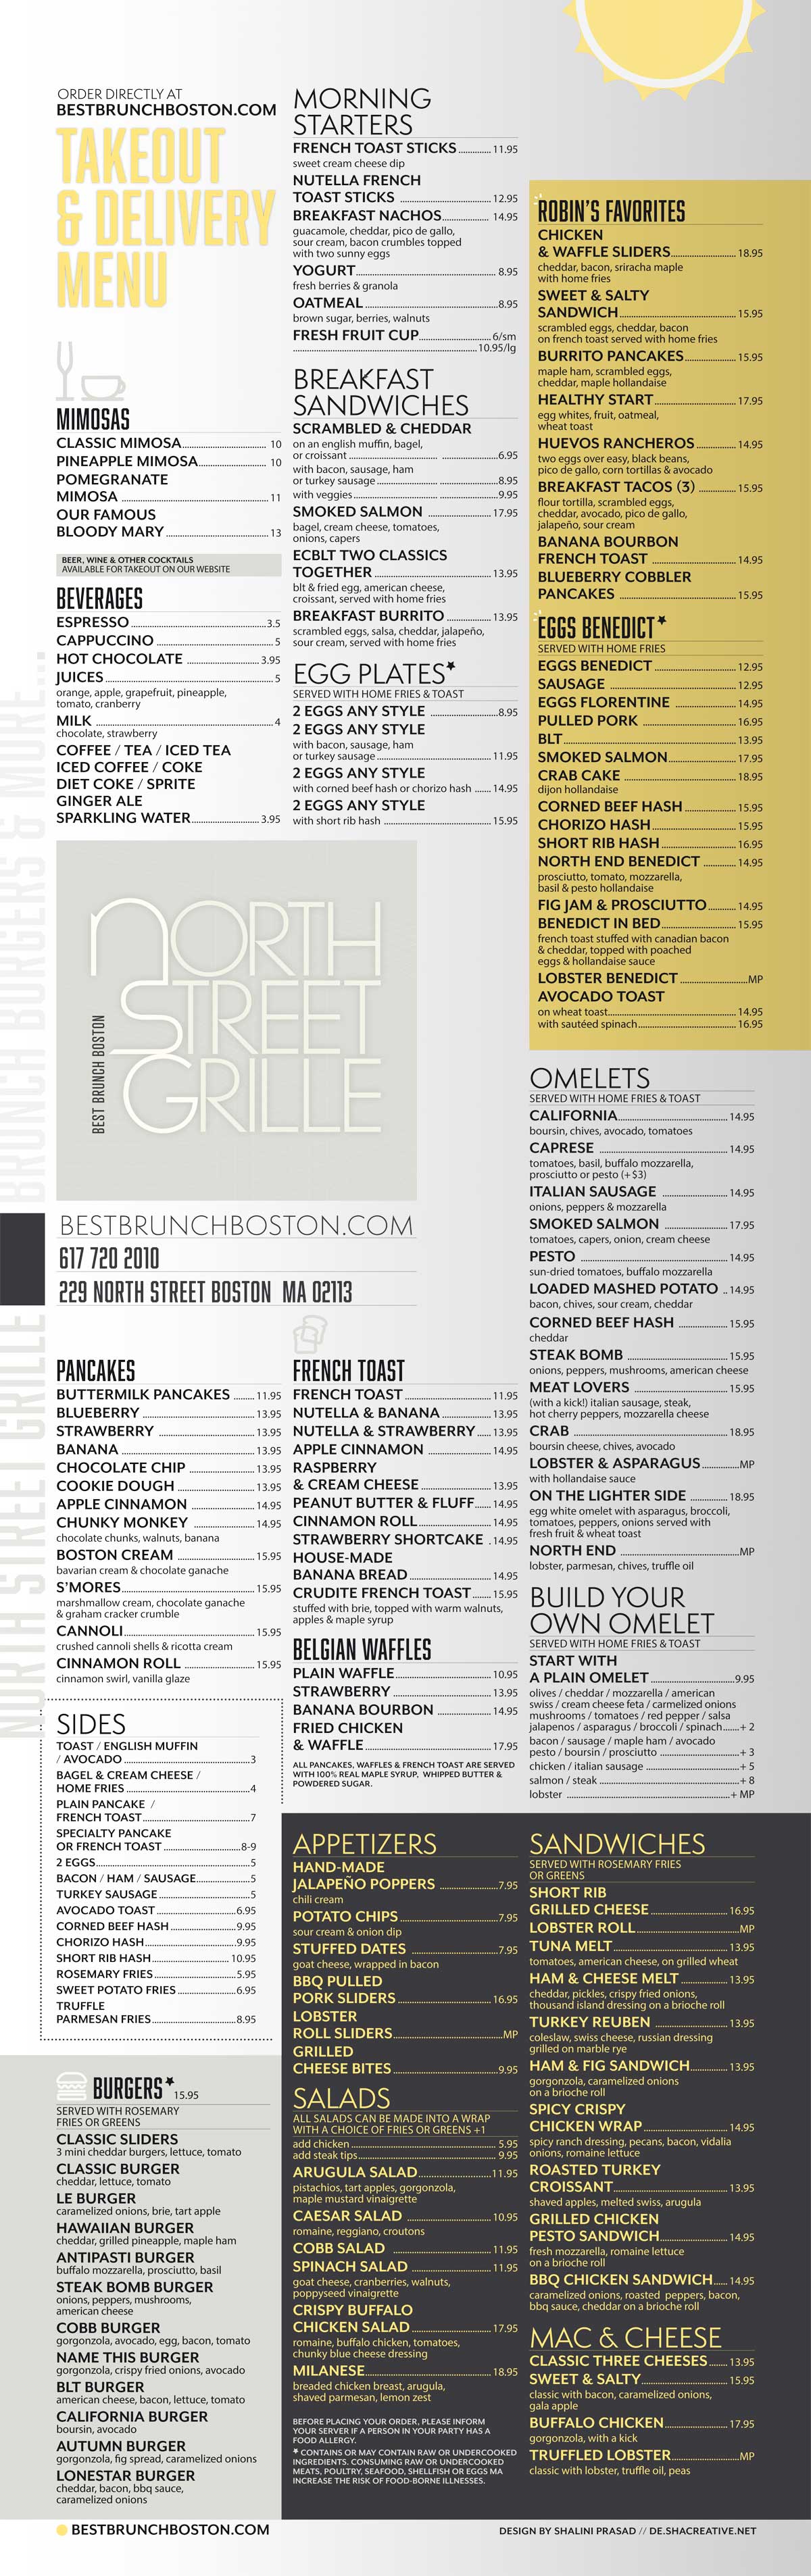 North Street Grille Takeout Menu